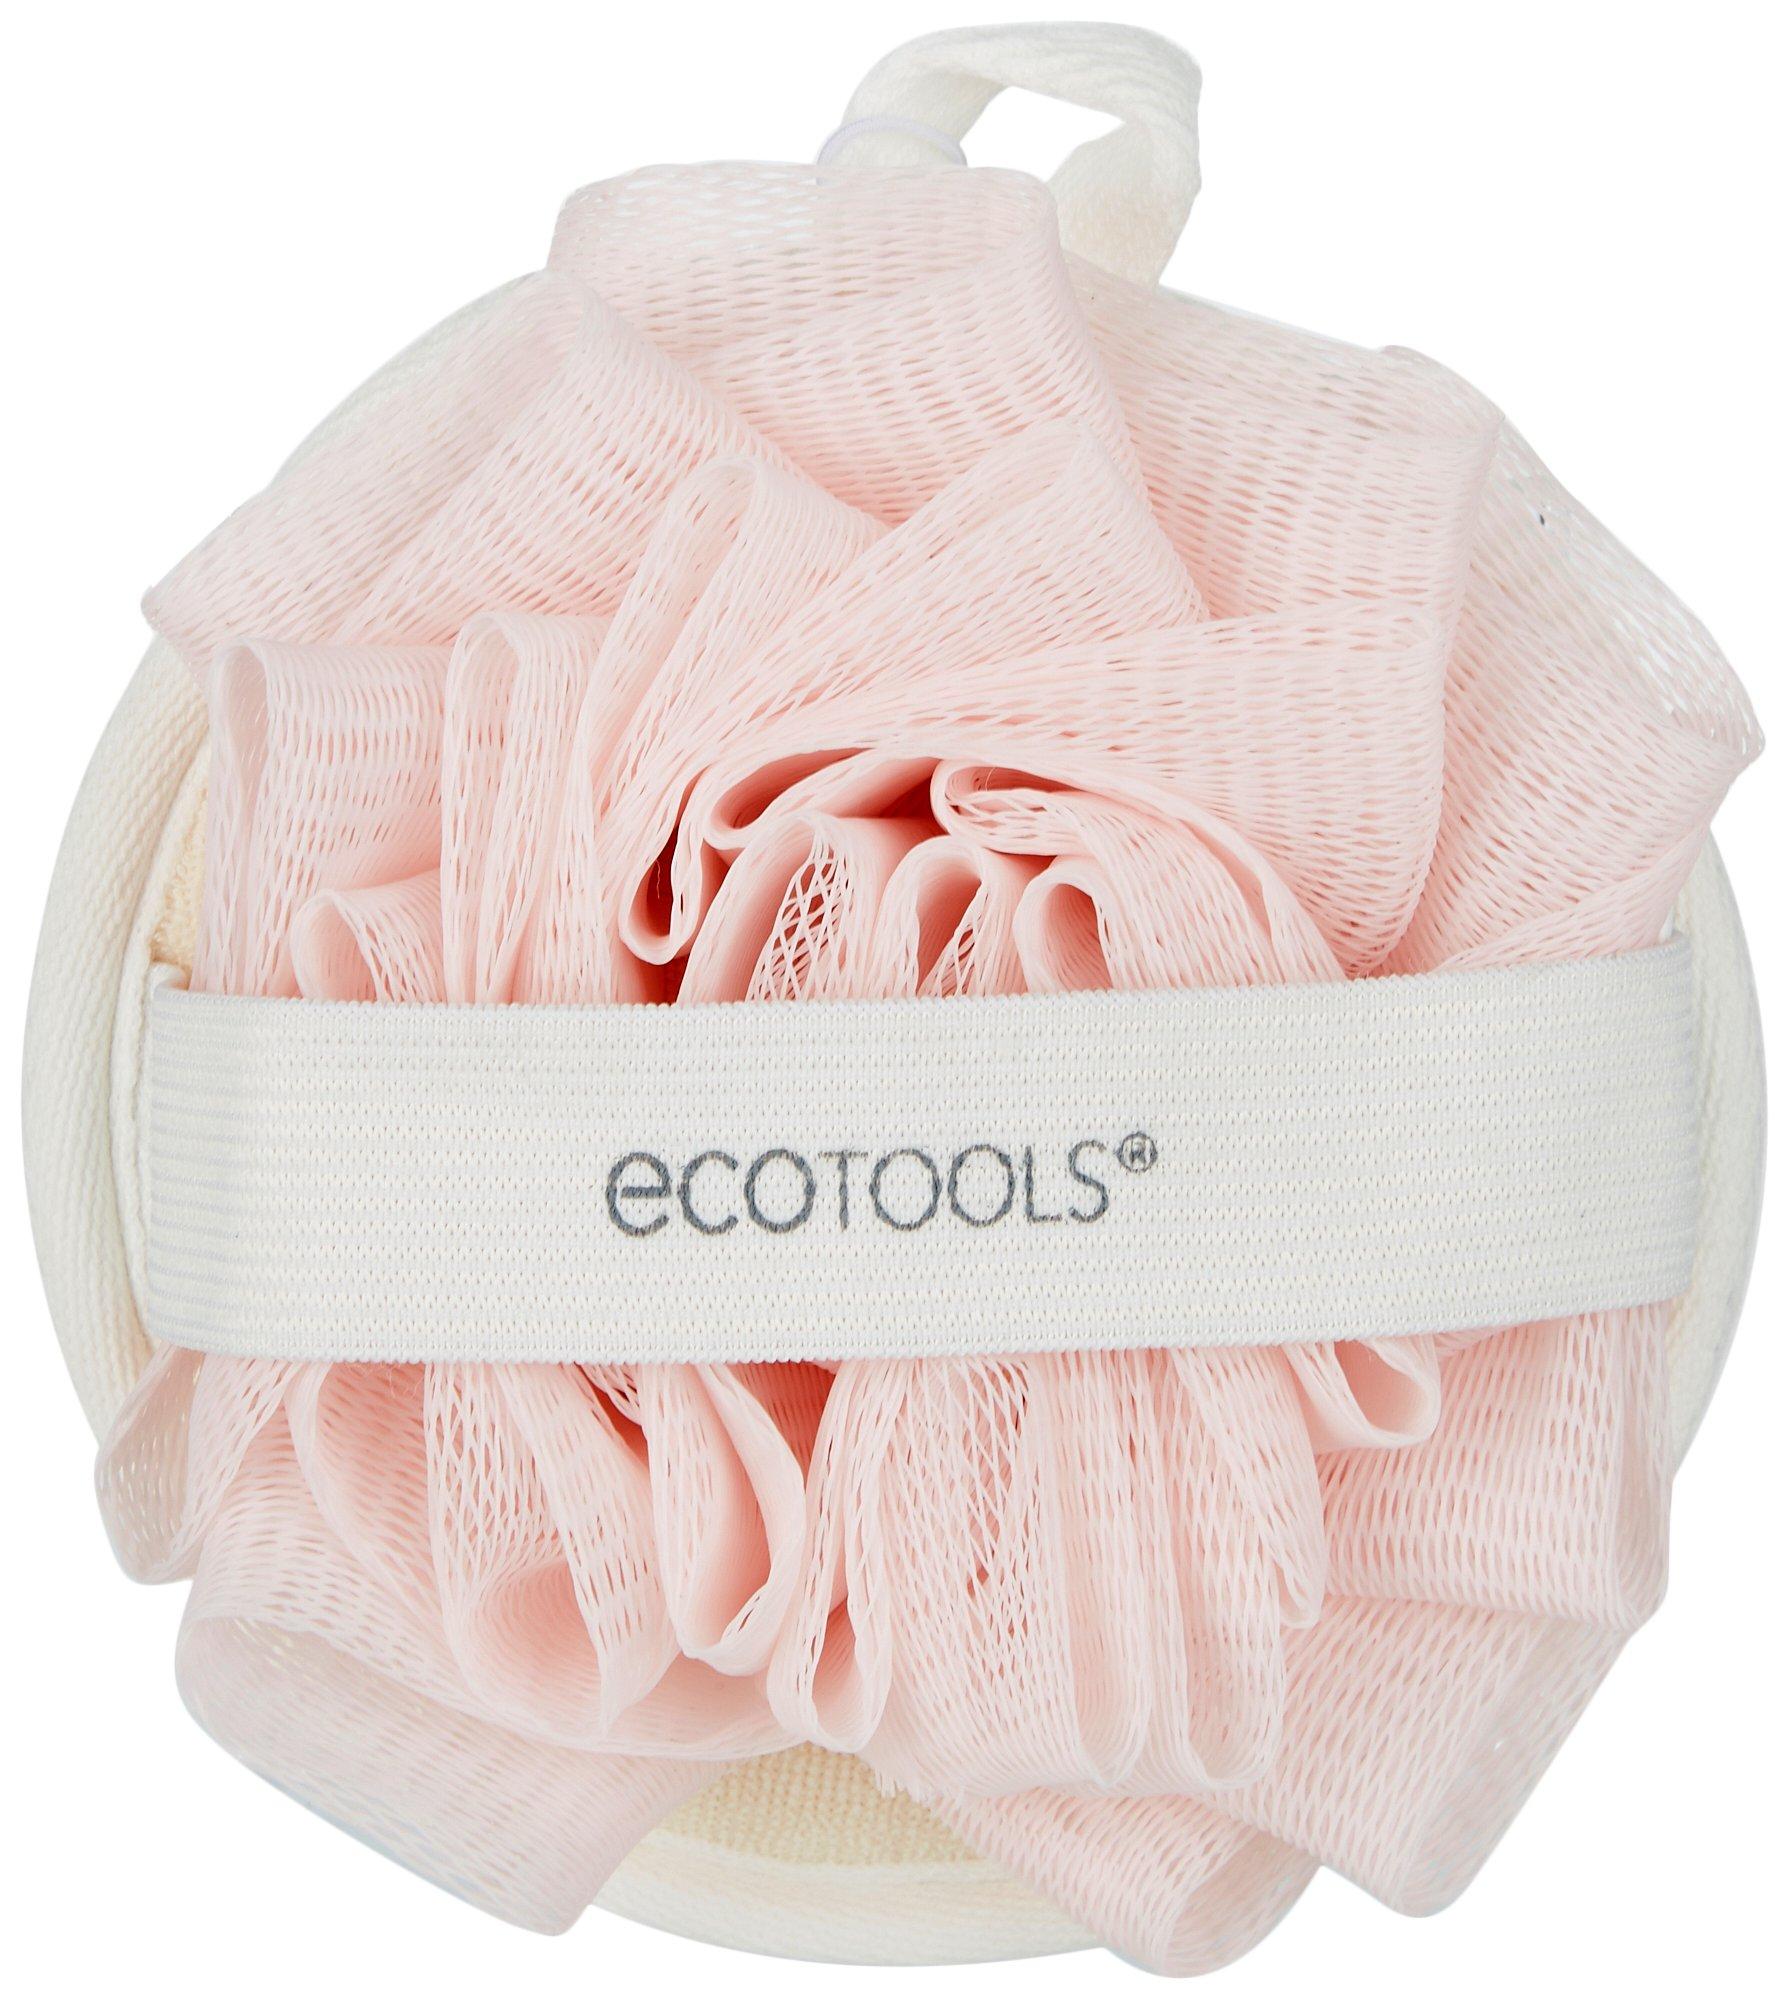 Ecopouf Dual Cleansing Pad